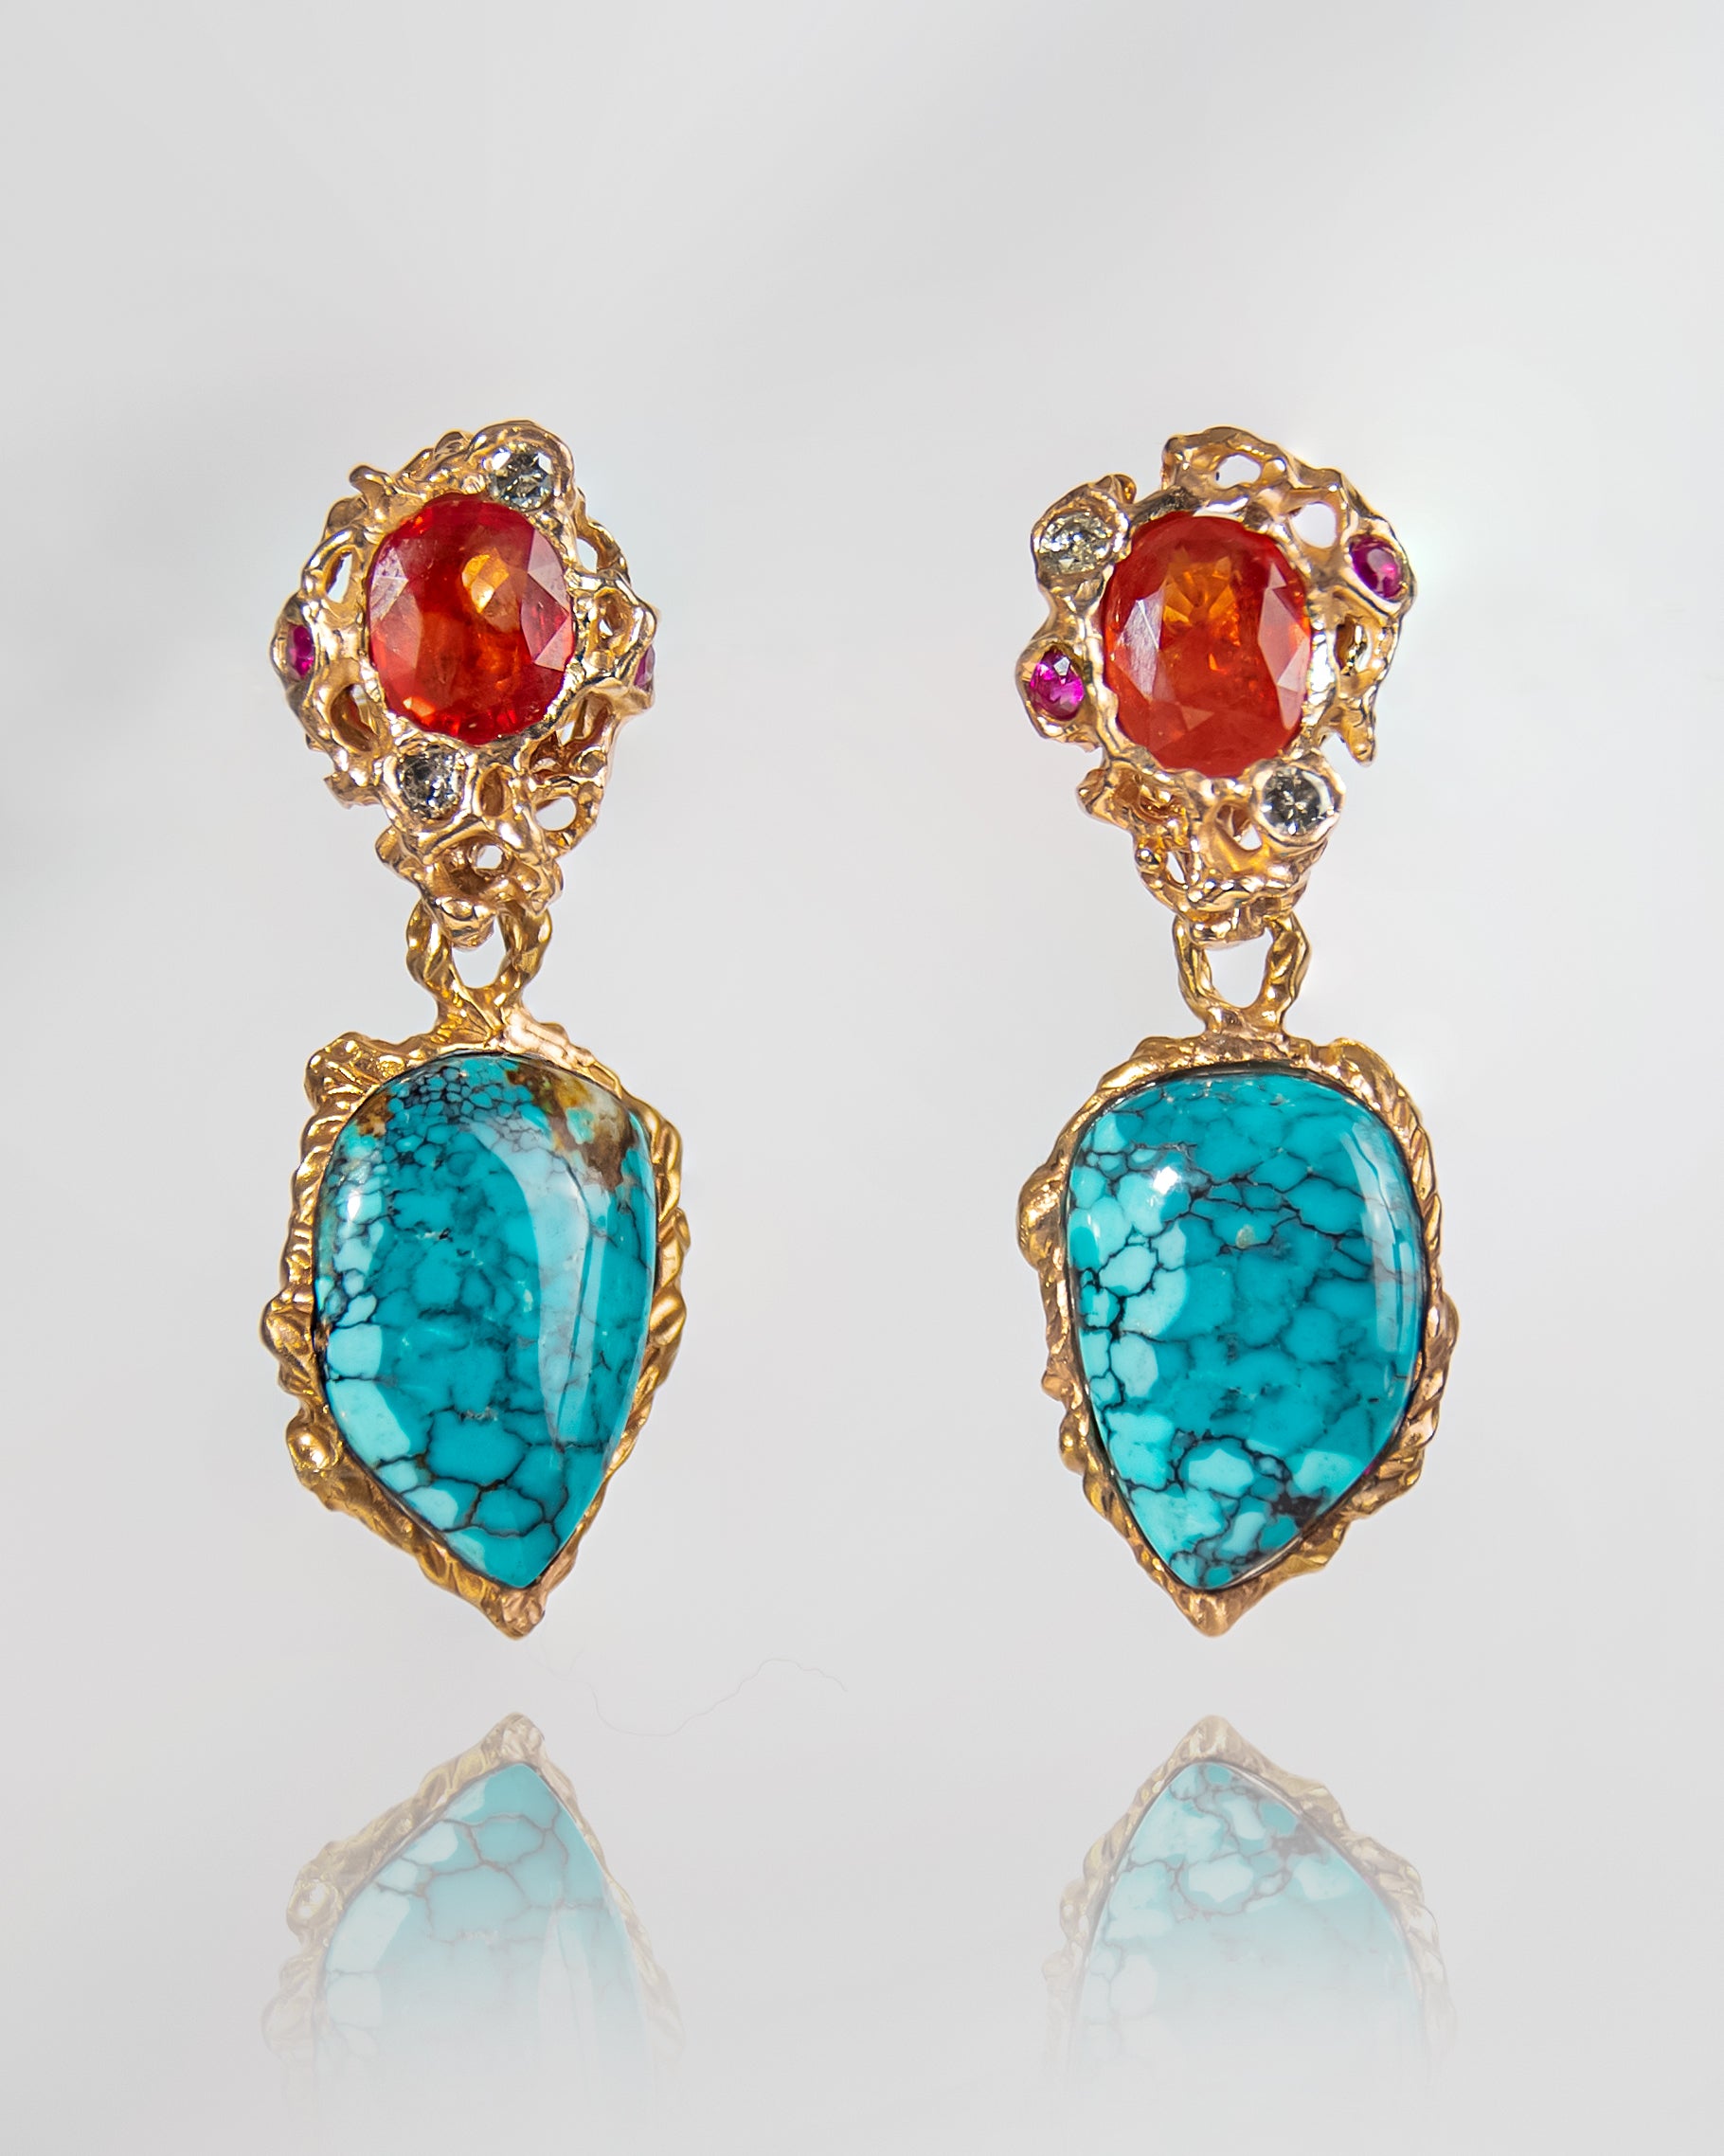 18K Rose Gold earrings set with spider-web Turquoise, Orange Sapphire, Rubies, and Diamonds